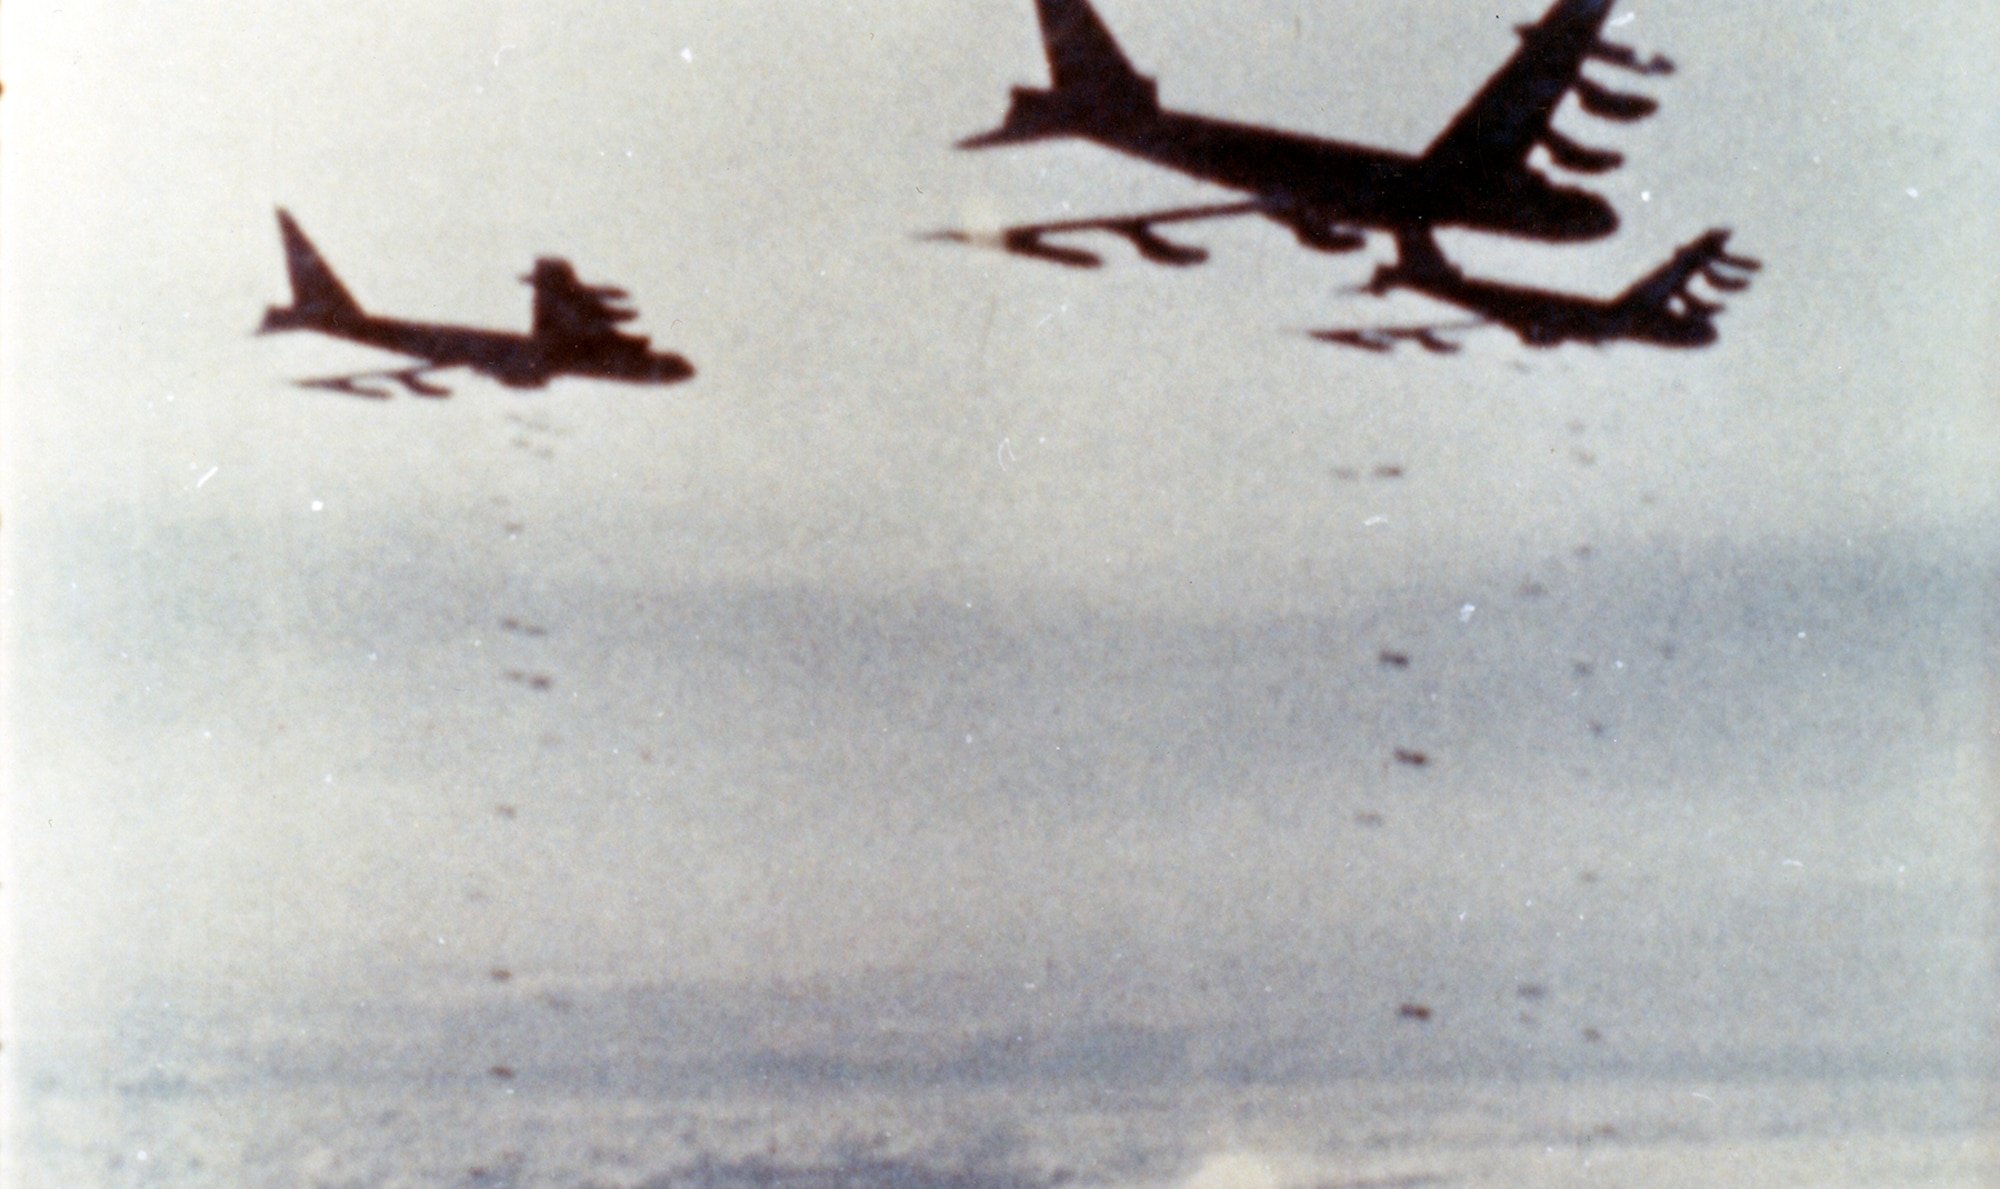 Air Force B-52s drop their loads of bombs on a close air support mission over Khe Sanh. Even from very high altitudes, they could accurately place their bombs within one-sixth of a mile of the besieged American forces. The aerial bombing campaign in support of the besieged American forces at Khe Sanh was named OPERATION NIAGARA for this “waterfall” of bombs. (U.S. Air Force photo)